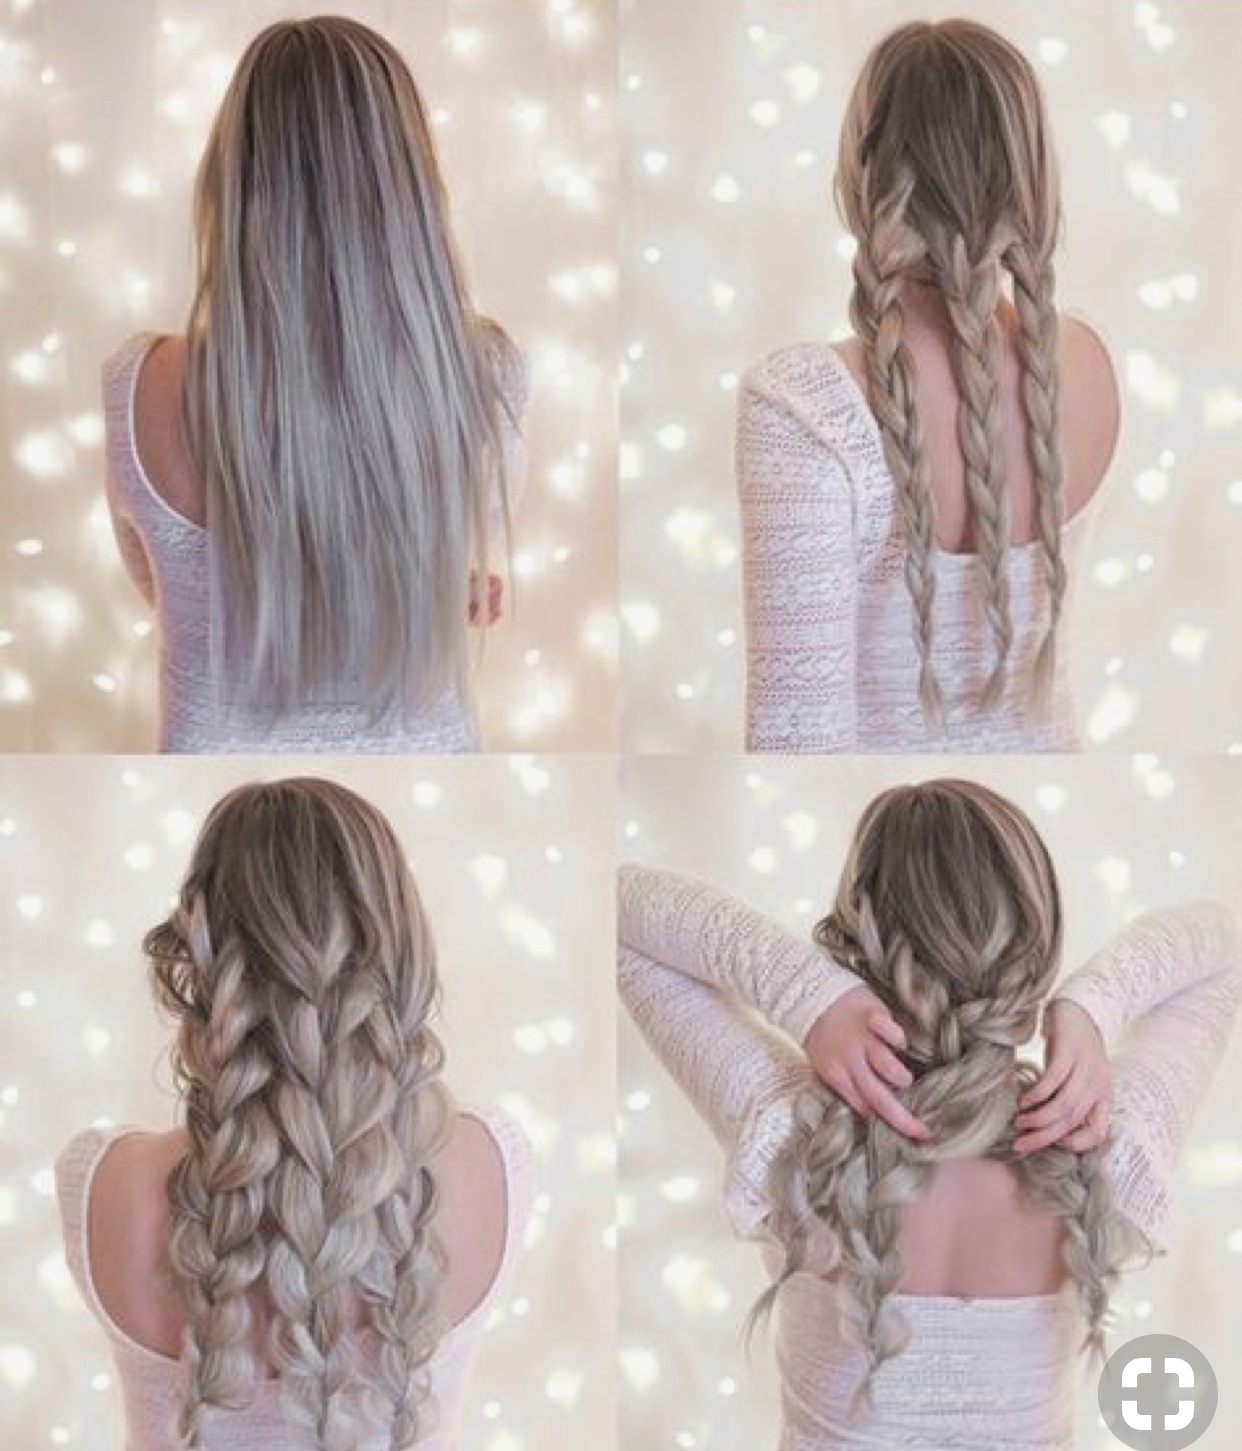 7 Cute and Sexy Fall Hairstyles That Are Easy To Do